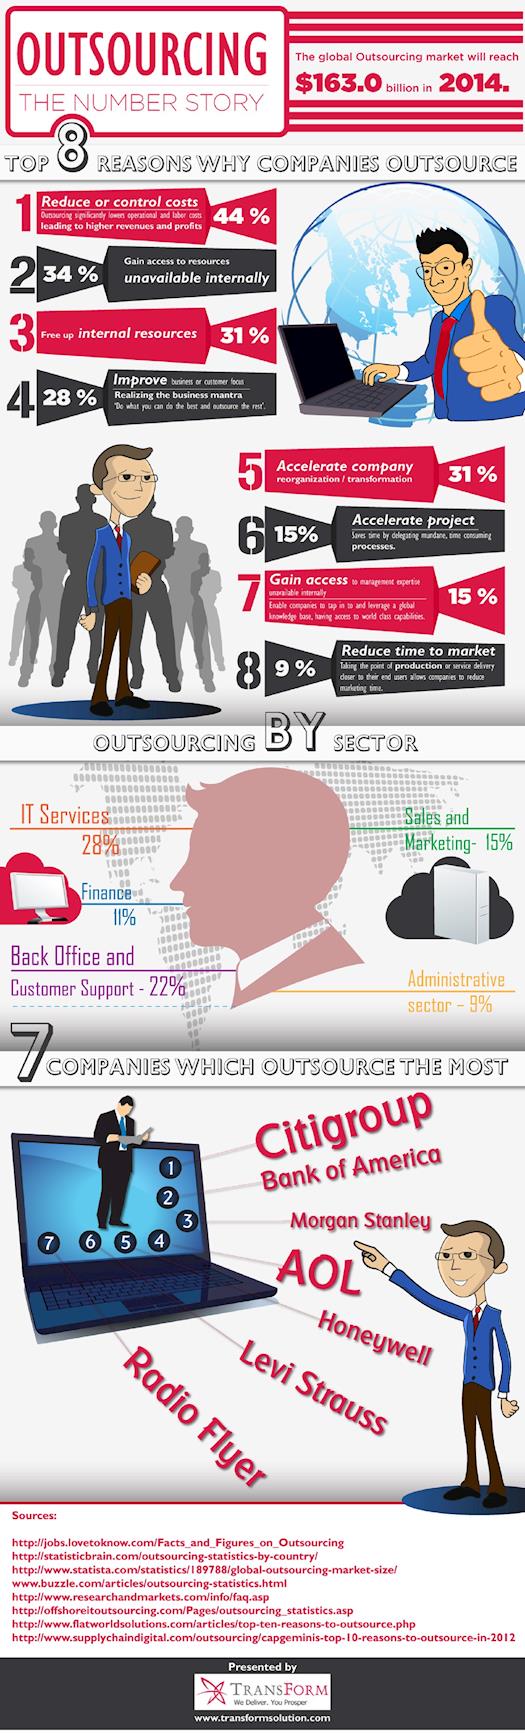 Top 8 Reasons Why Companies Outsource [Infographic]